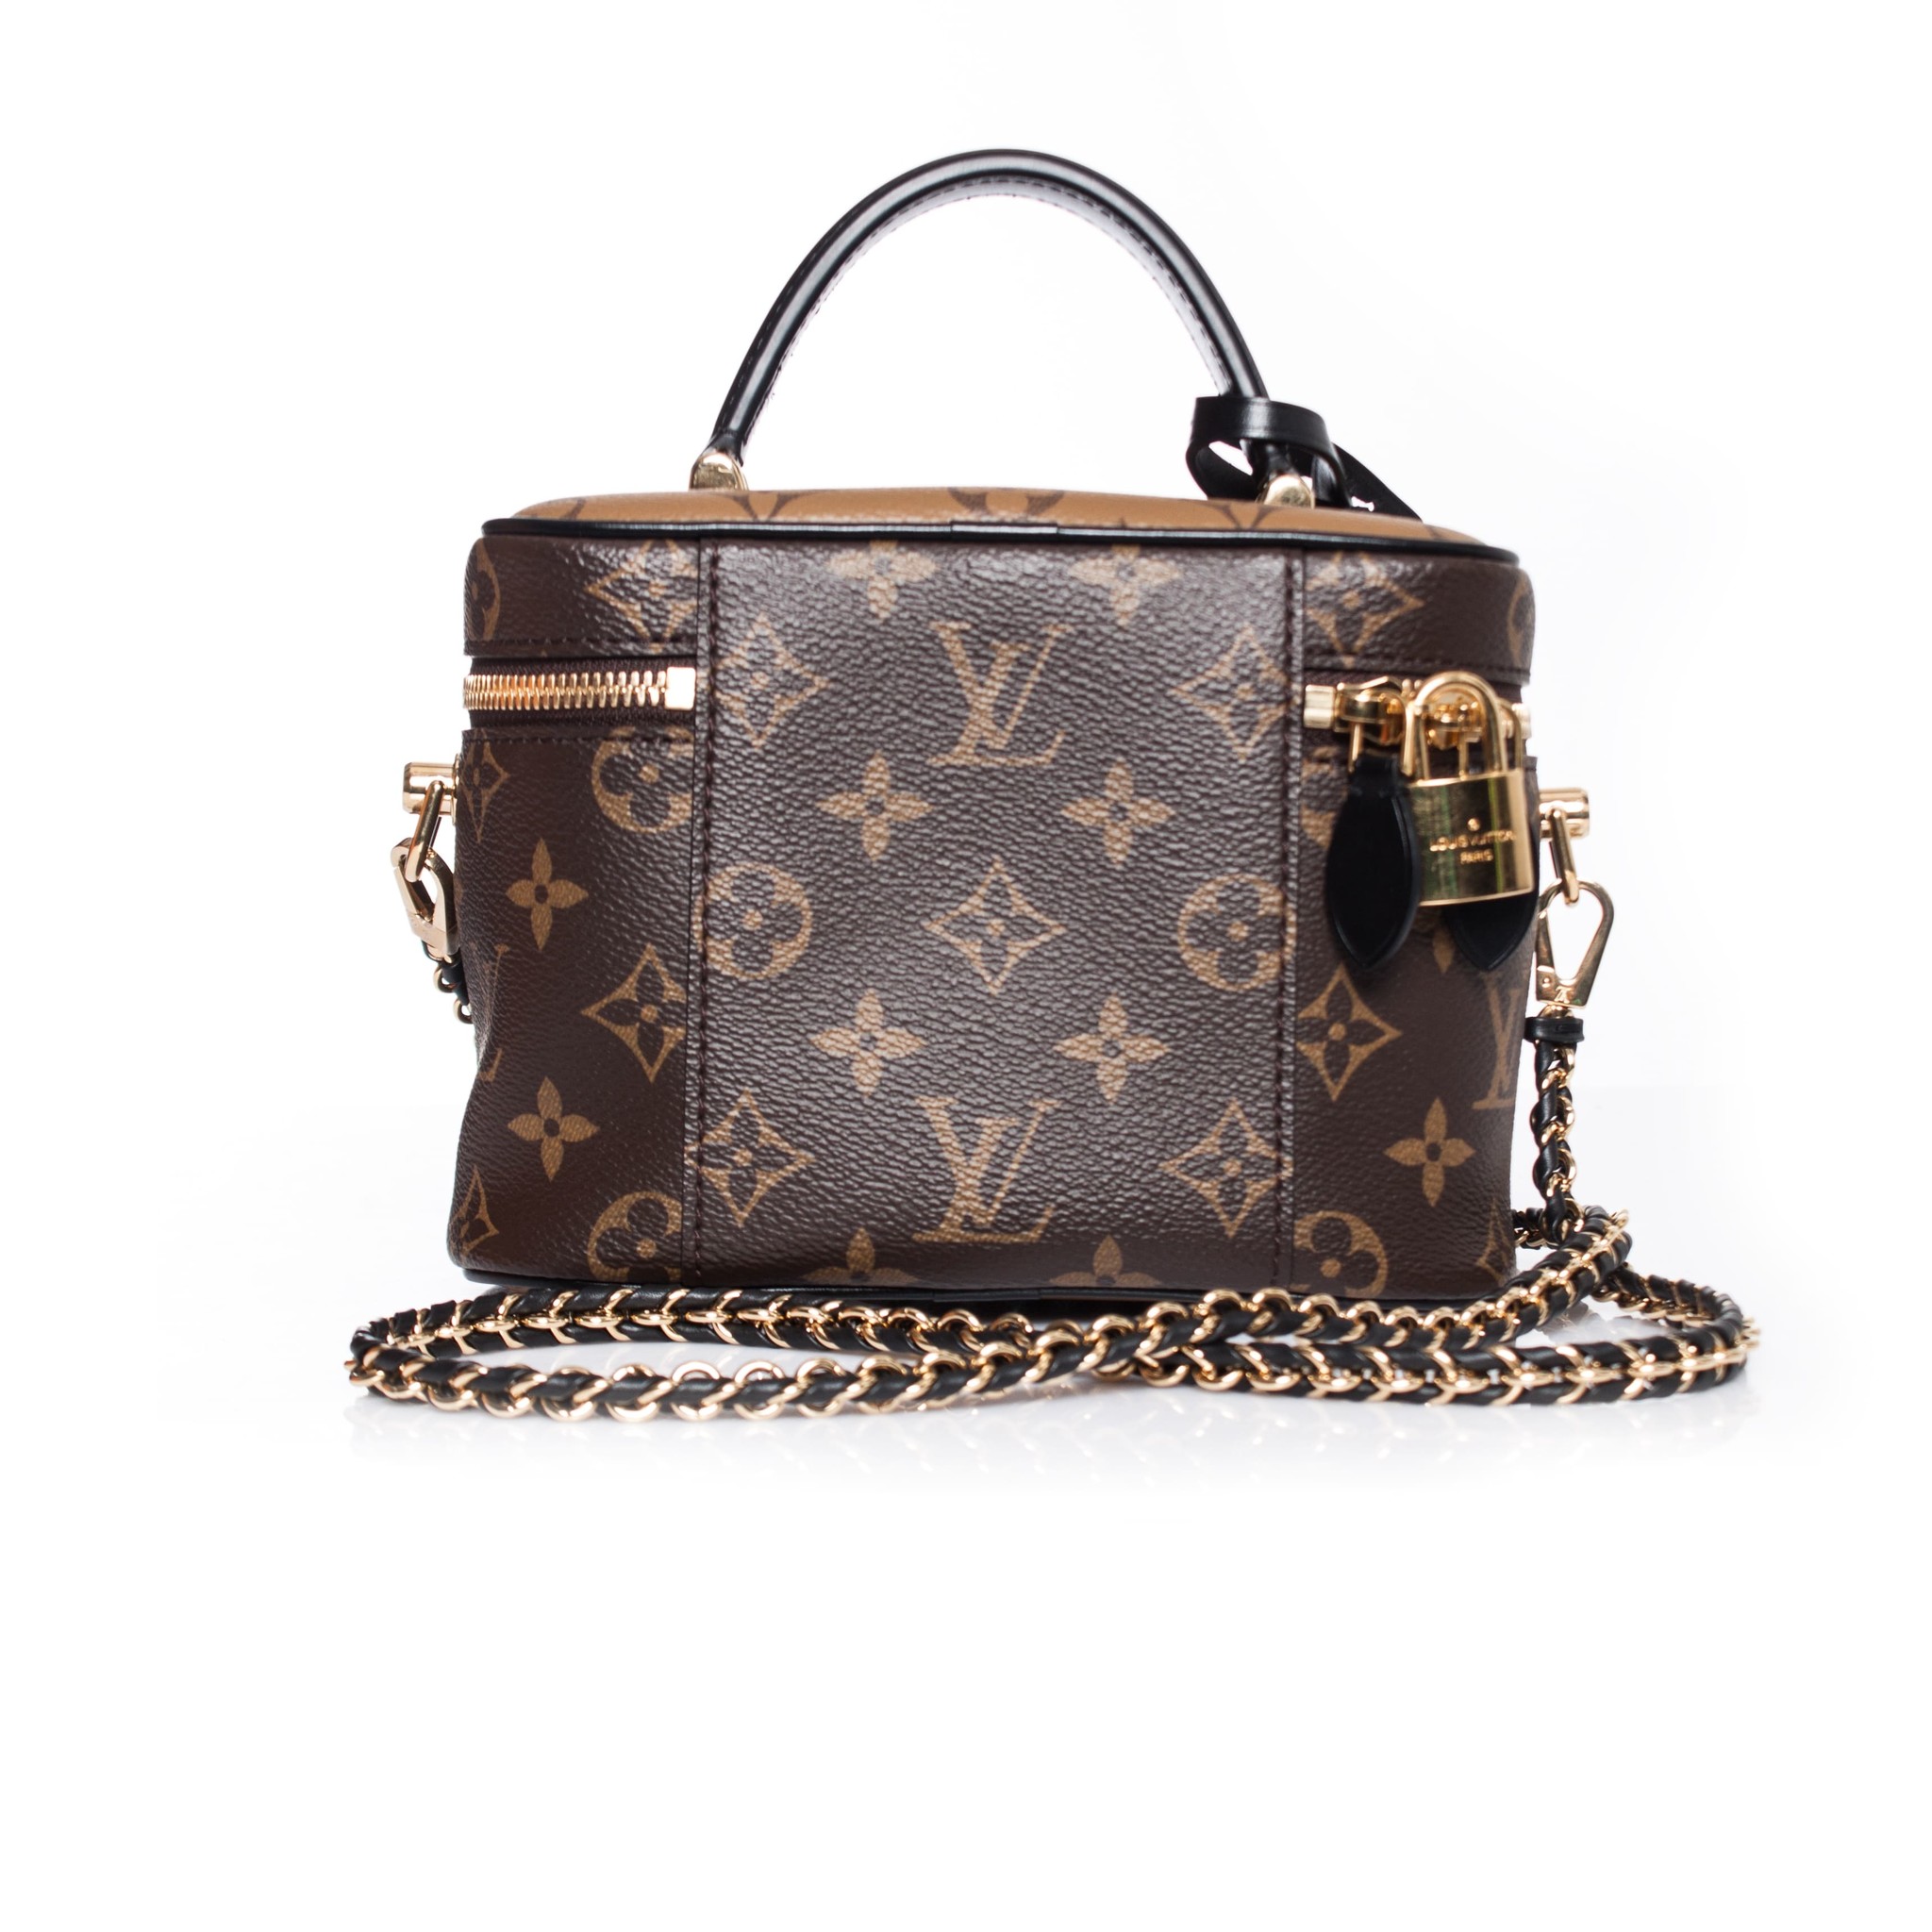 Luxury Personal Shopping on Instagram: “Louis Vuitton Vanity PM